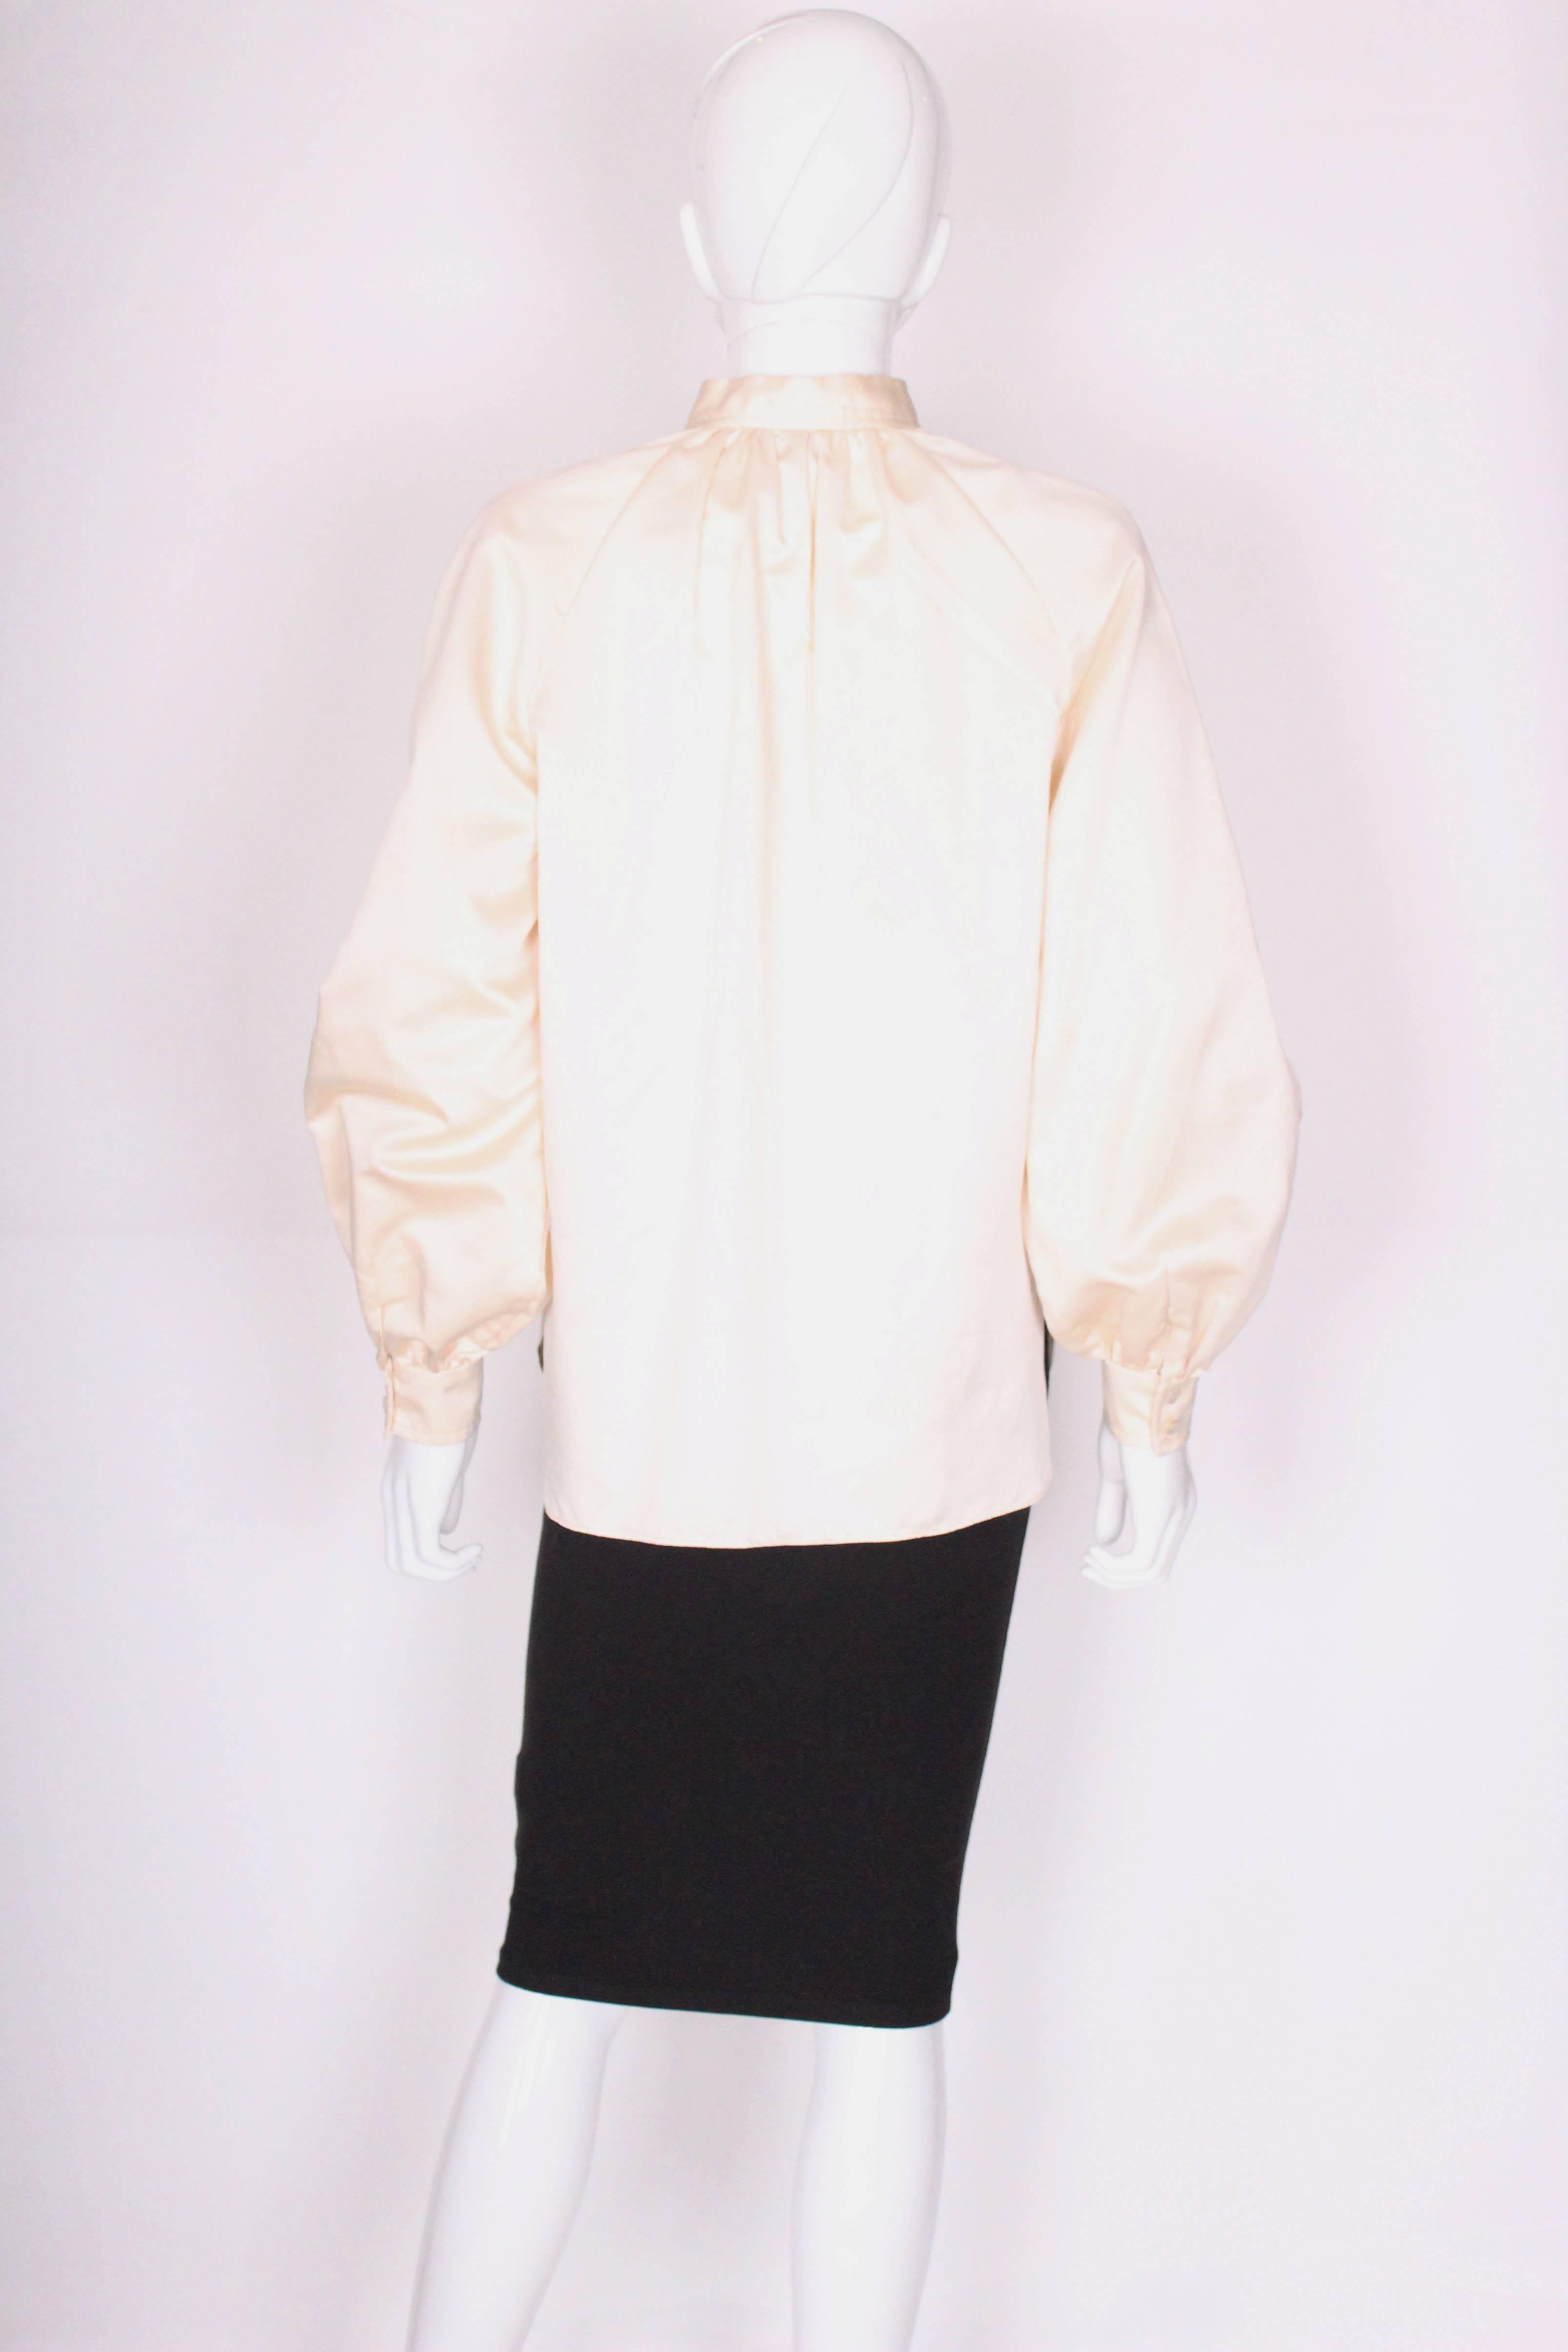 Women's 1970's Ivory Blouse by Caroline Charles For Sale